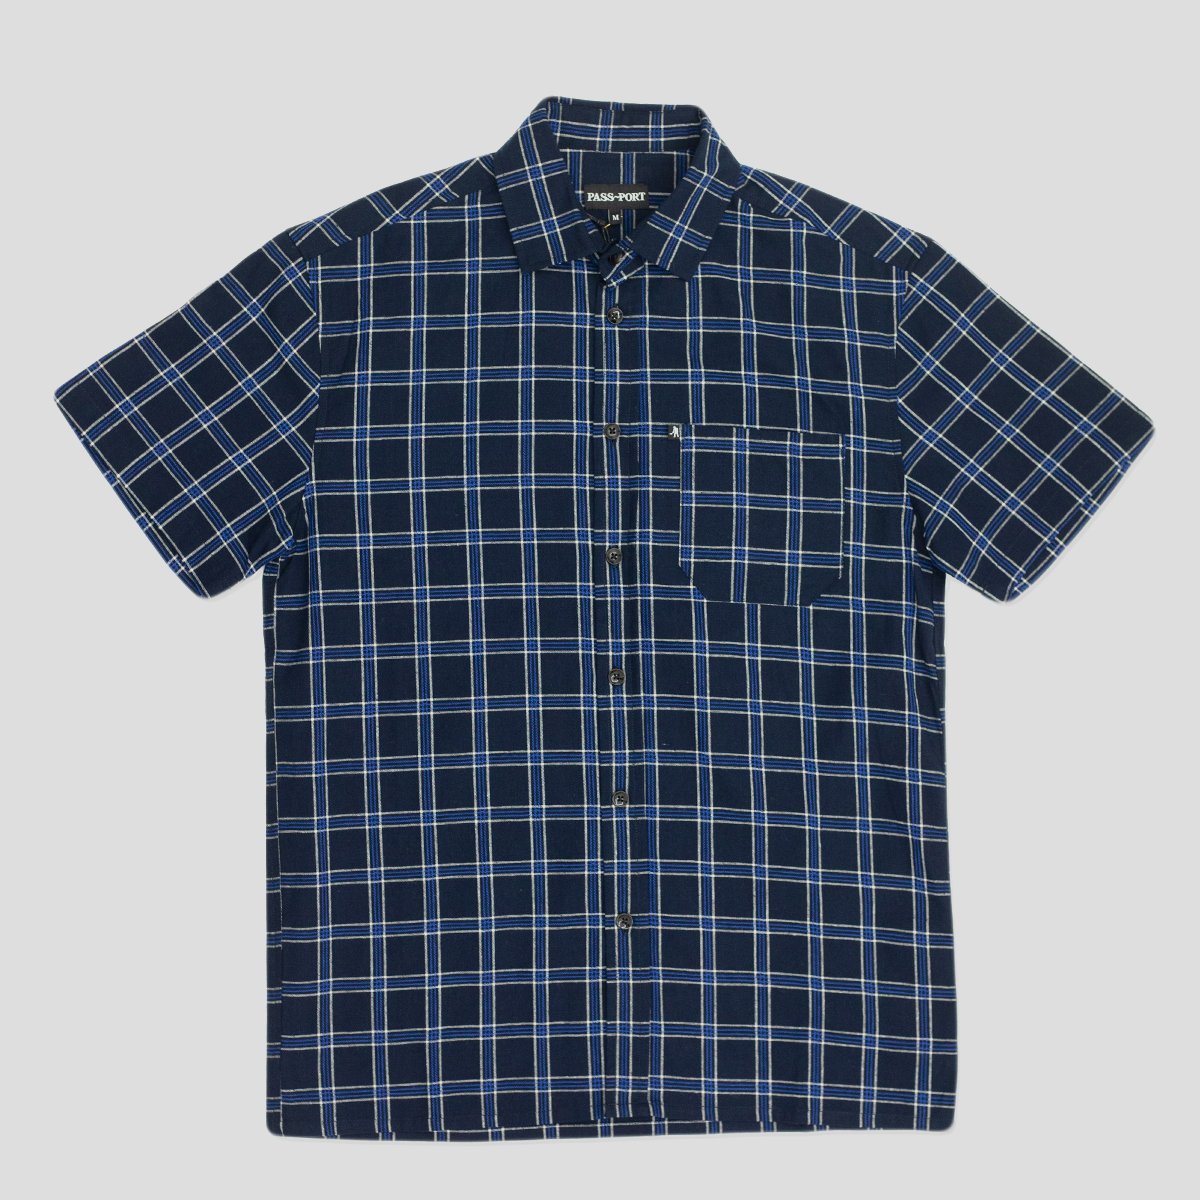 PASS~PORT "WORKERS CHECK" S/S SHIRT NAVY